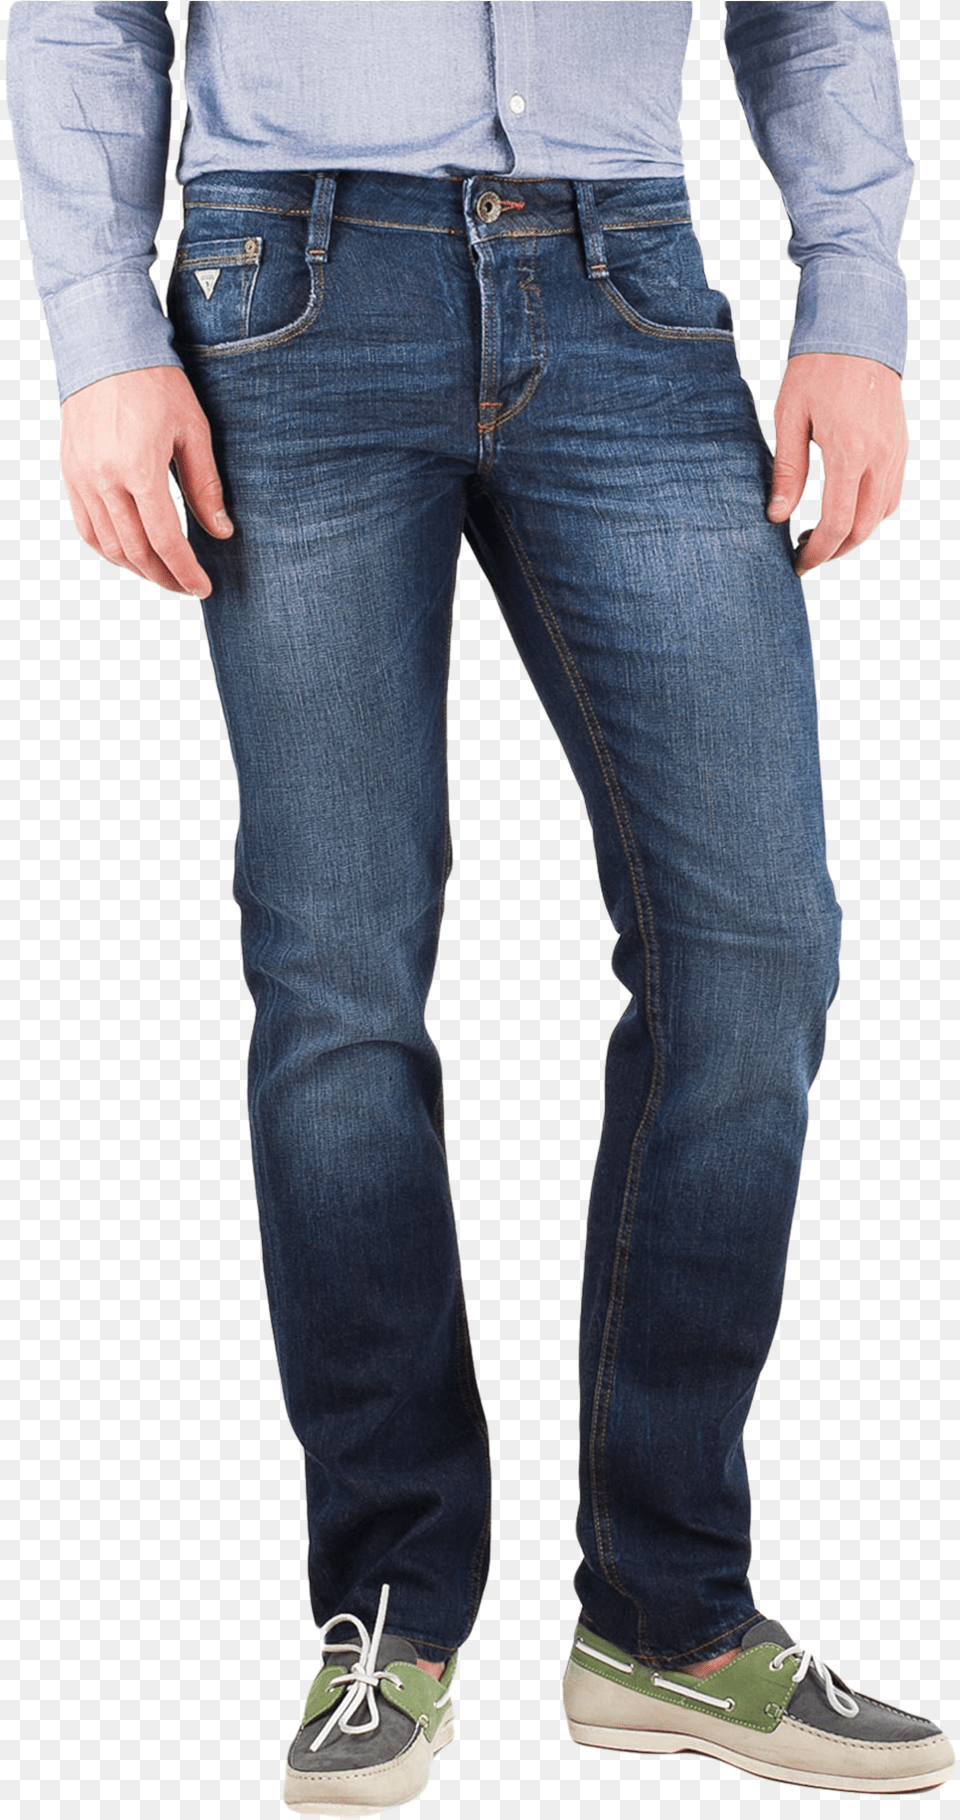 Jeans M44as3 1 Guess Guess Jeans Men Price, Clothing, Pants, Footwear, Shoe Png Image